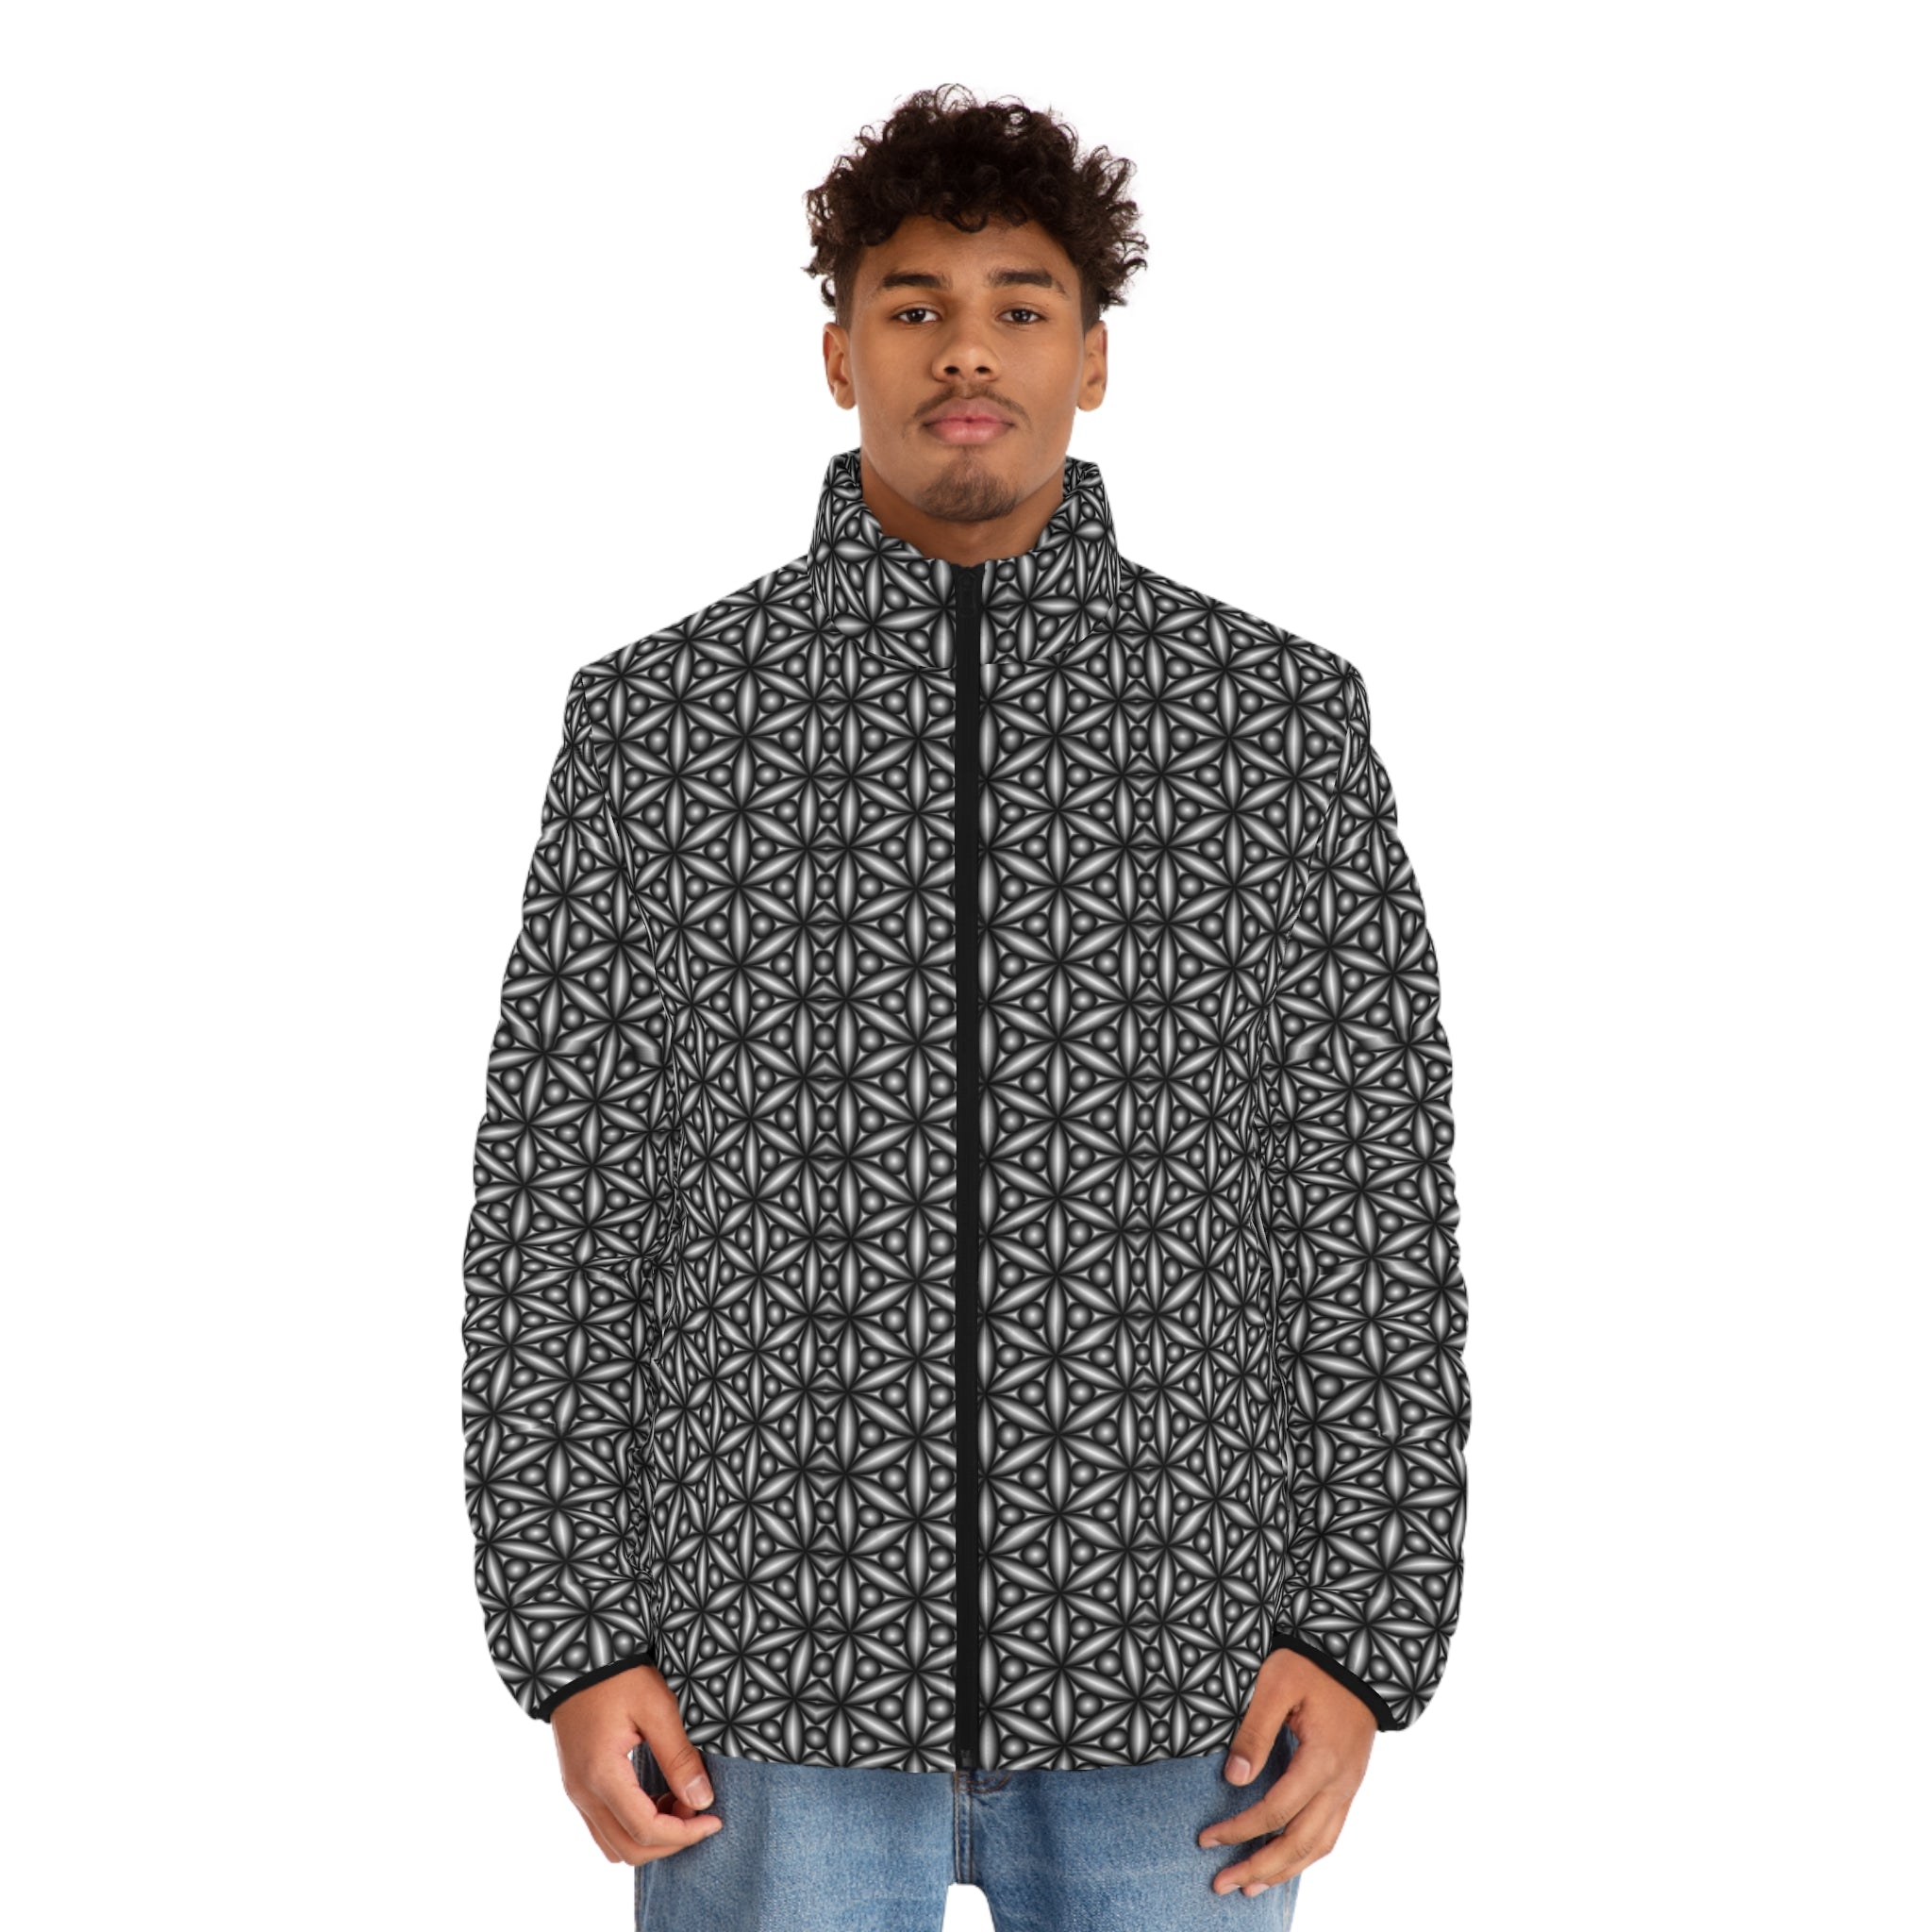 black and white geometric men's puffer jacket with a 6 prong star pattern